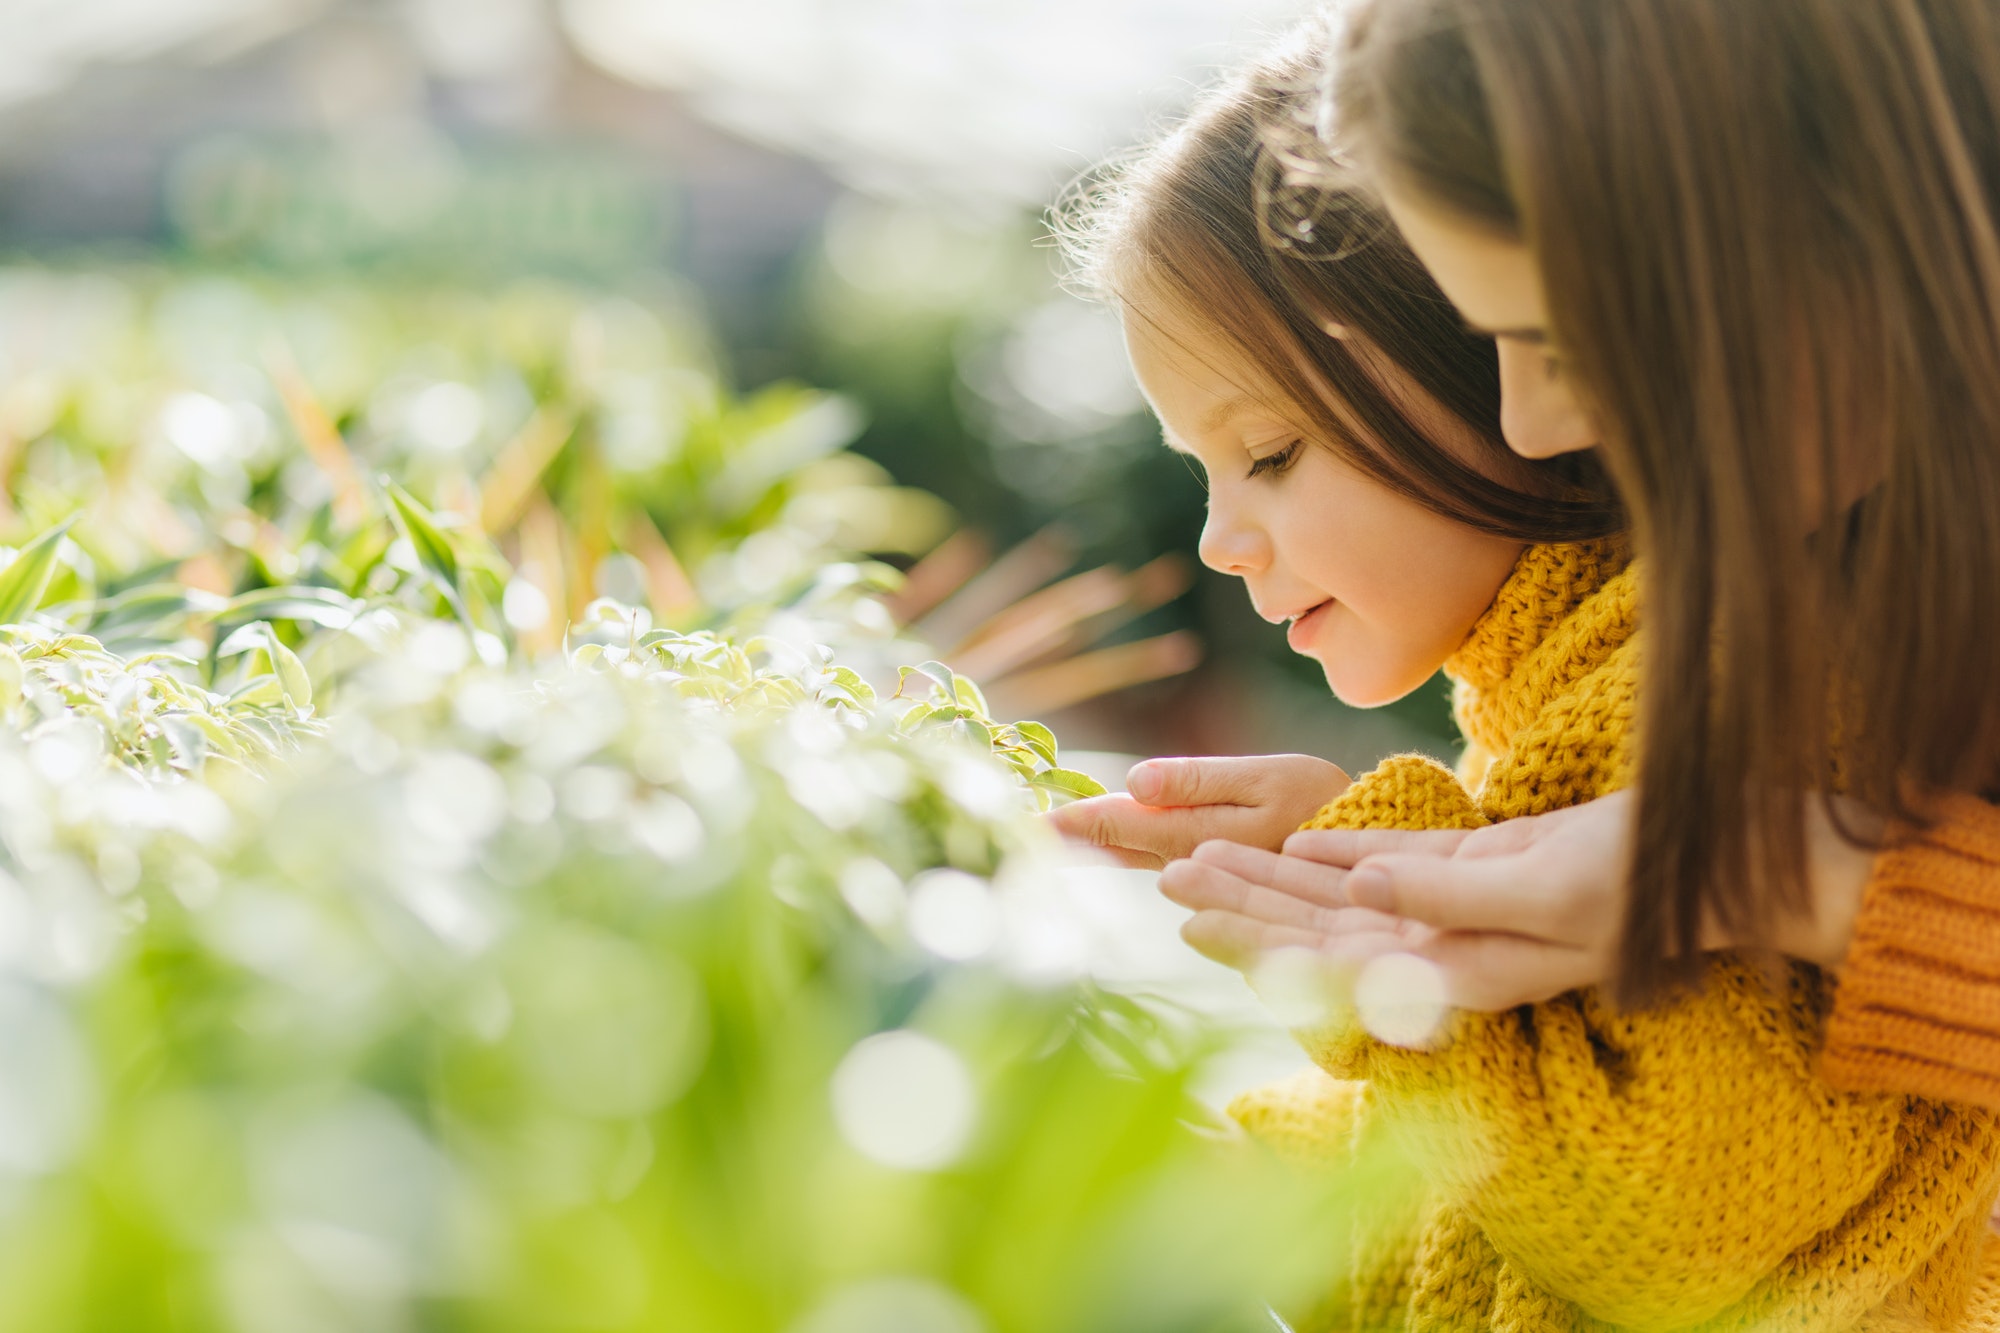 Woman and kid looking at green plants. Inspired mom and daughter enjoying gardening